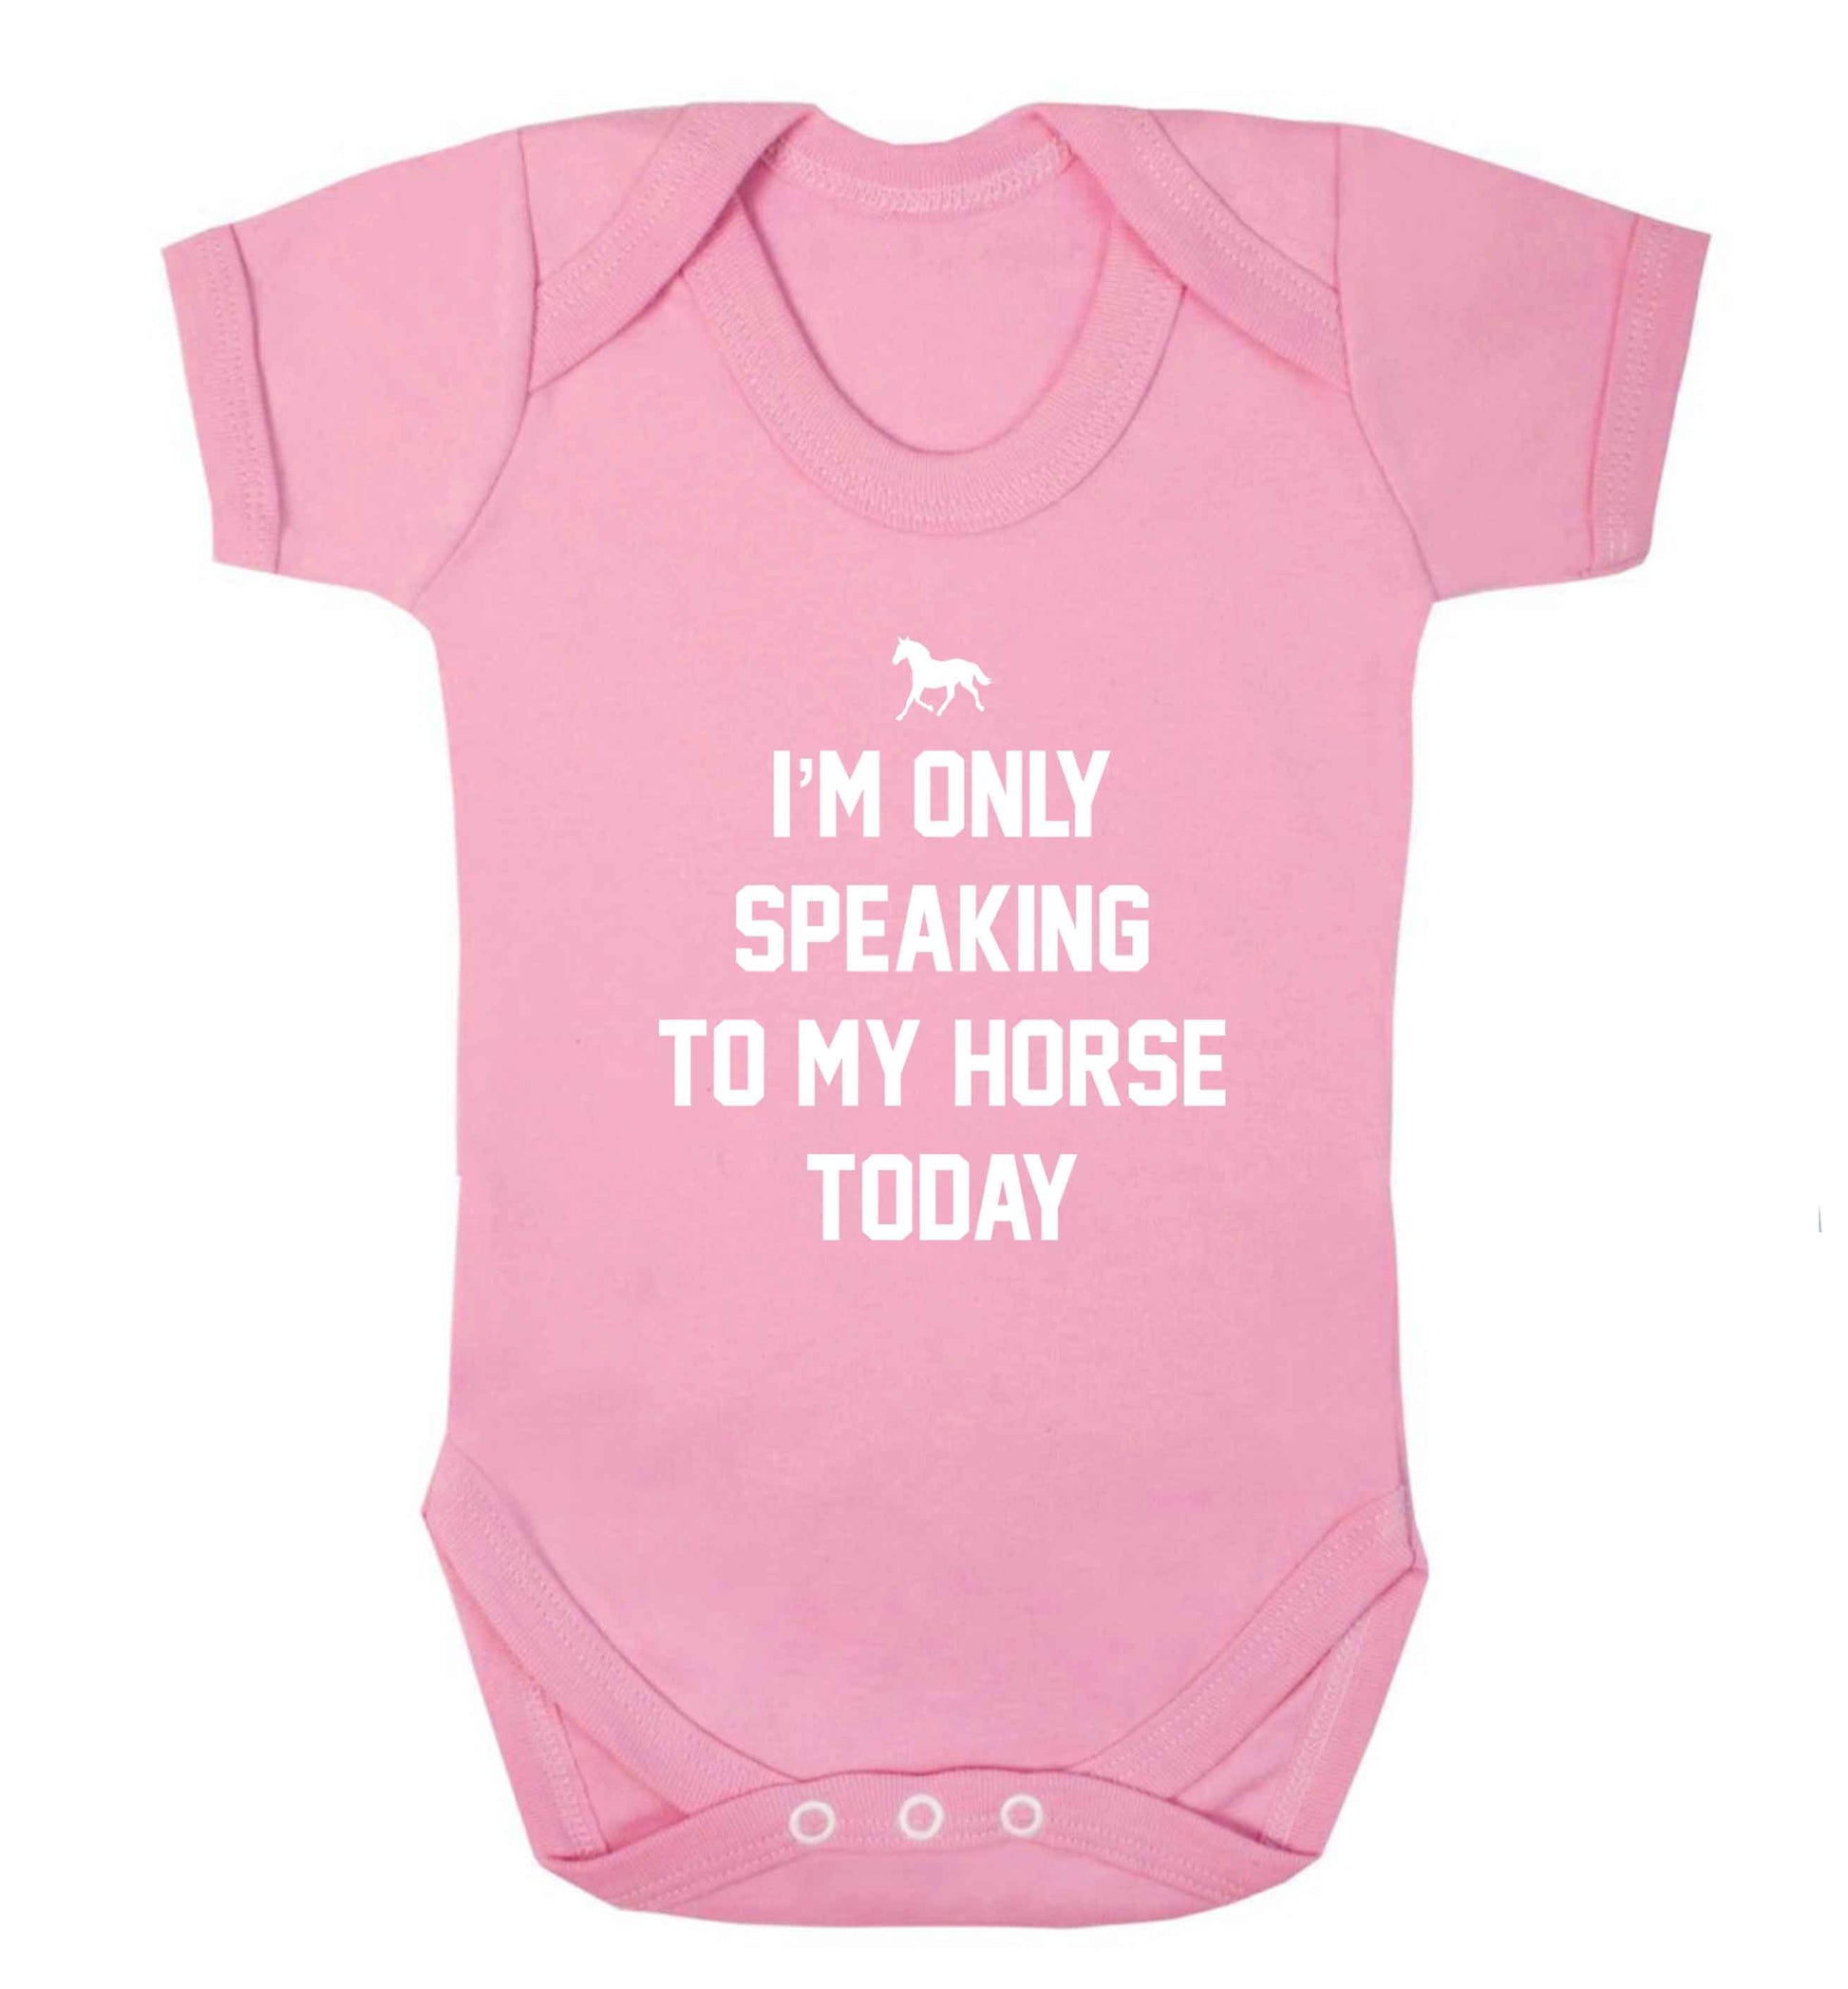 I'm only speaking to my horse today baby vest pale pink 18-24 months